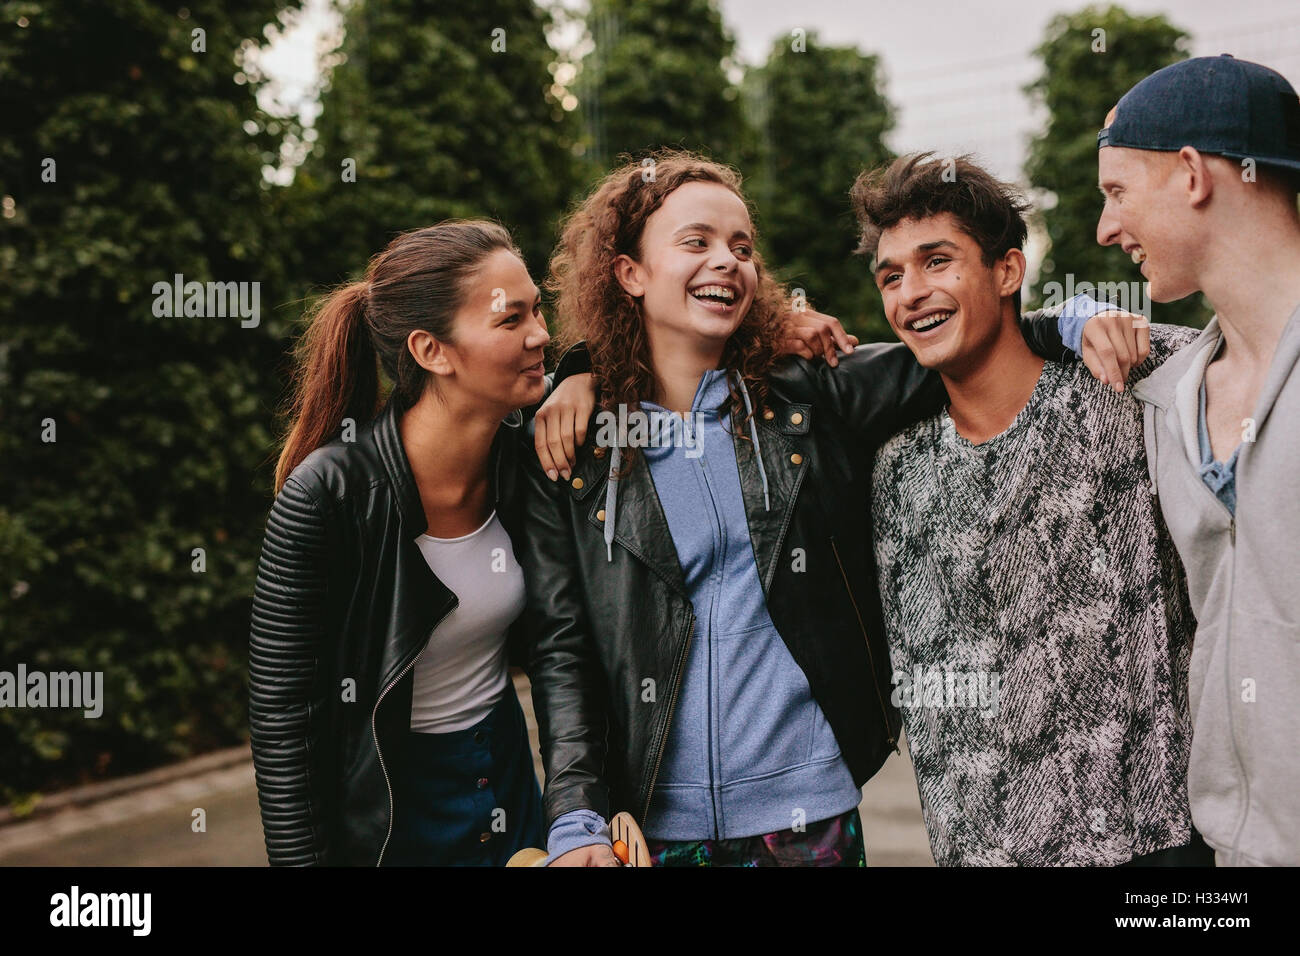 Portrait of four young friends together smiling. Mixed race group of people having fun outdoors. Stock Photo